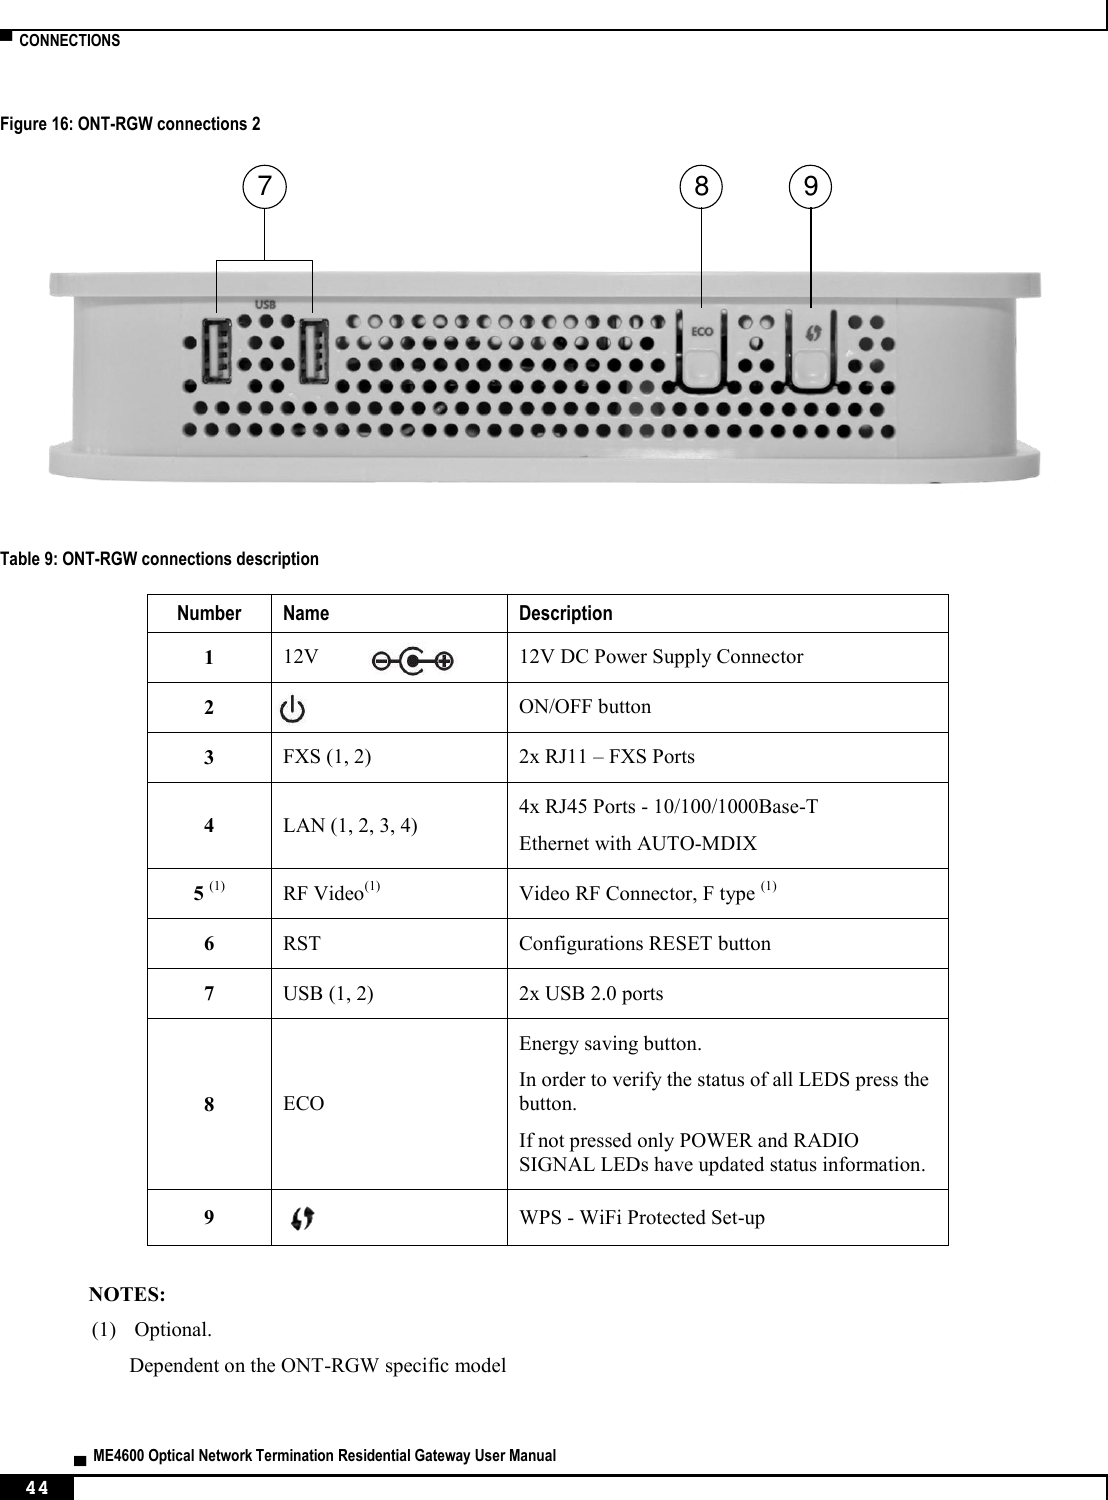  ▀  CONNECTIONS   ▄  ME4600 Optical Network Termination Residential Gateway User Manual 44    Figure 16: ONT-RGW connections 2  Table 9: ONT-RGW connections description Number Name Description 1 12V         12V DC Power Supply Connector 2  ON/OFF button 3 FXS (1, 2) 2x RJ11 – FXS Ports 4 LAN (1, 2, 3, 4) 4x RJ45 Ports - 10/100/1000Base-T Ethernet with AUTO-MDIX 5 (1) RF Video(1) Video RF Connector, F type (1) 6 RST Configurations RESET button  7 USB (1, 2) 2x USB 2.0 ports 8 ECO Energy saving button.  In order to verify the status of all LEDS press the button. If not pressed only POWER and RADIO SIGNAL LEDs have updated status information. 9  WPS - WiFi Protected Set-up  NOTES: (1)  Optional. Dependent on the ONT-RGW specific model  8 97